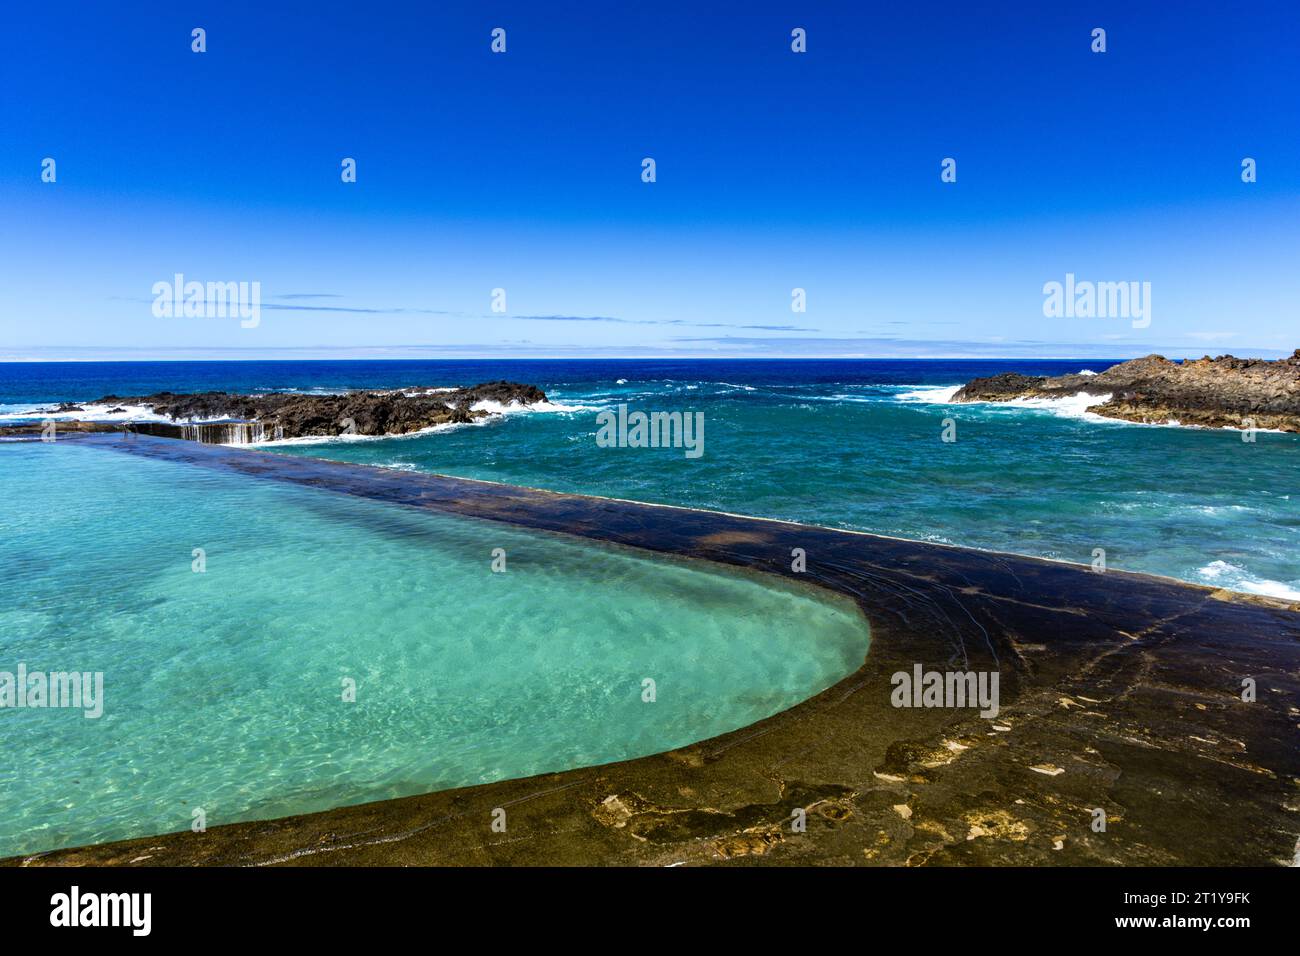 A natural swimming pool with water from the Atlantic Ocean, Piscina Natural Spain Tenerife Stock Photo